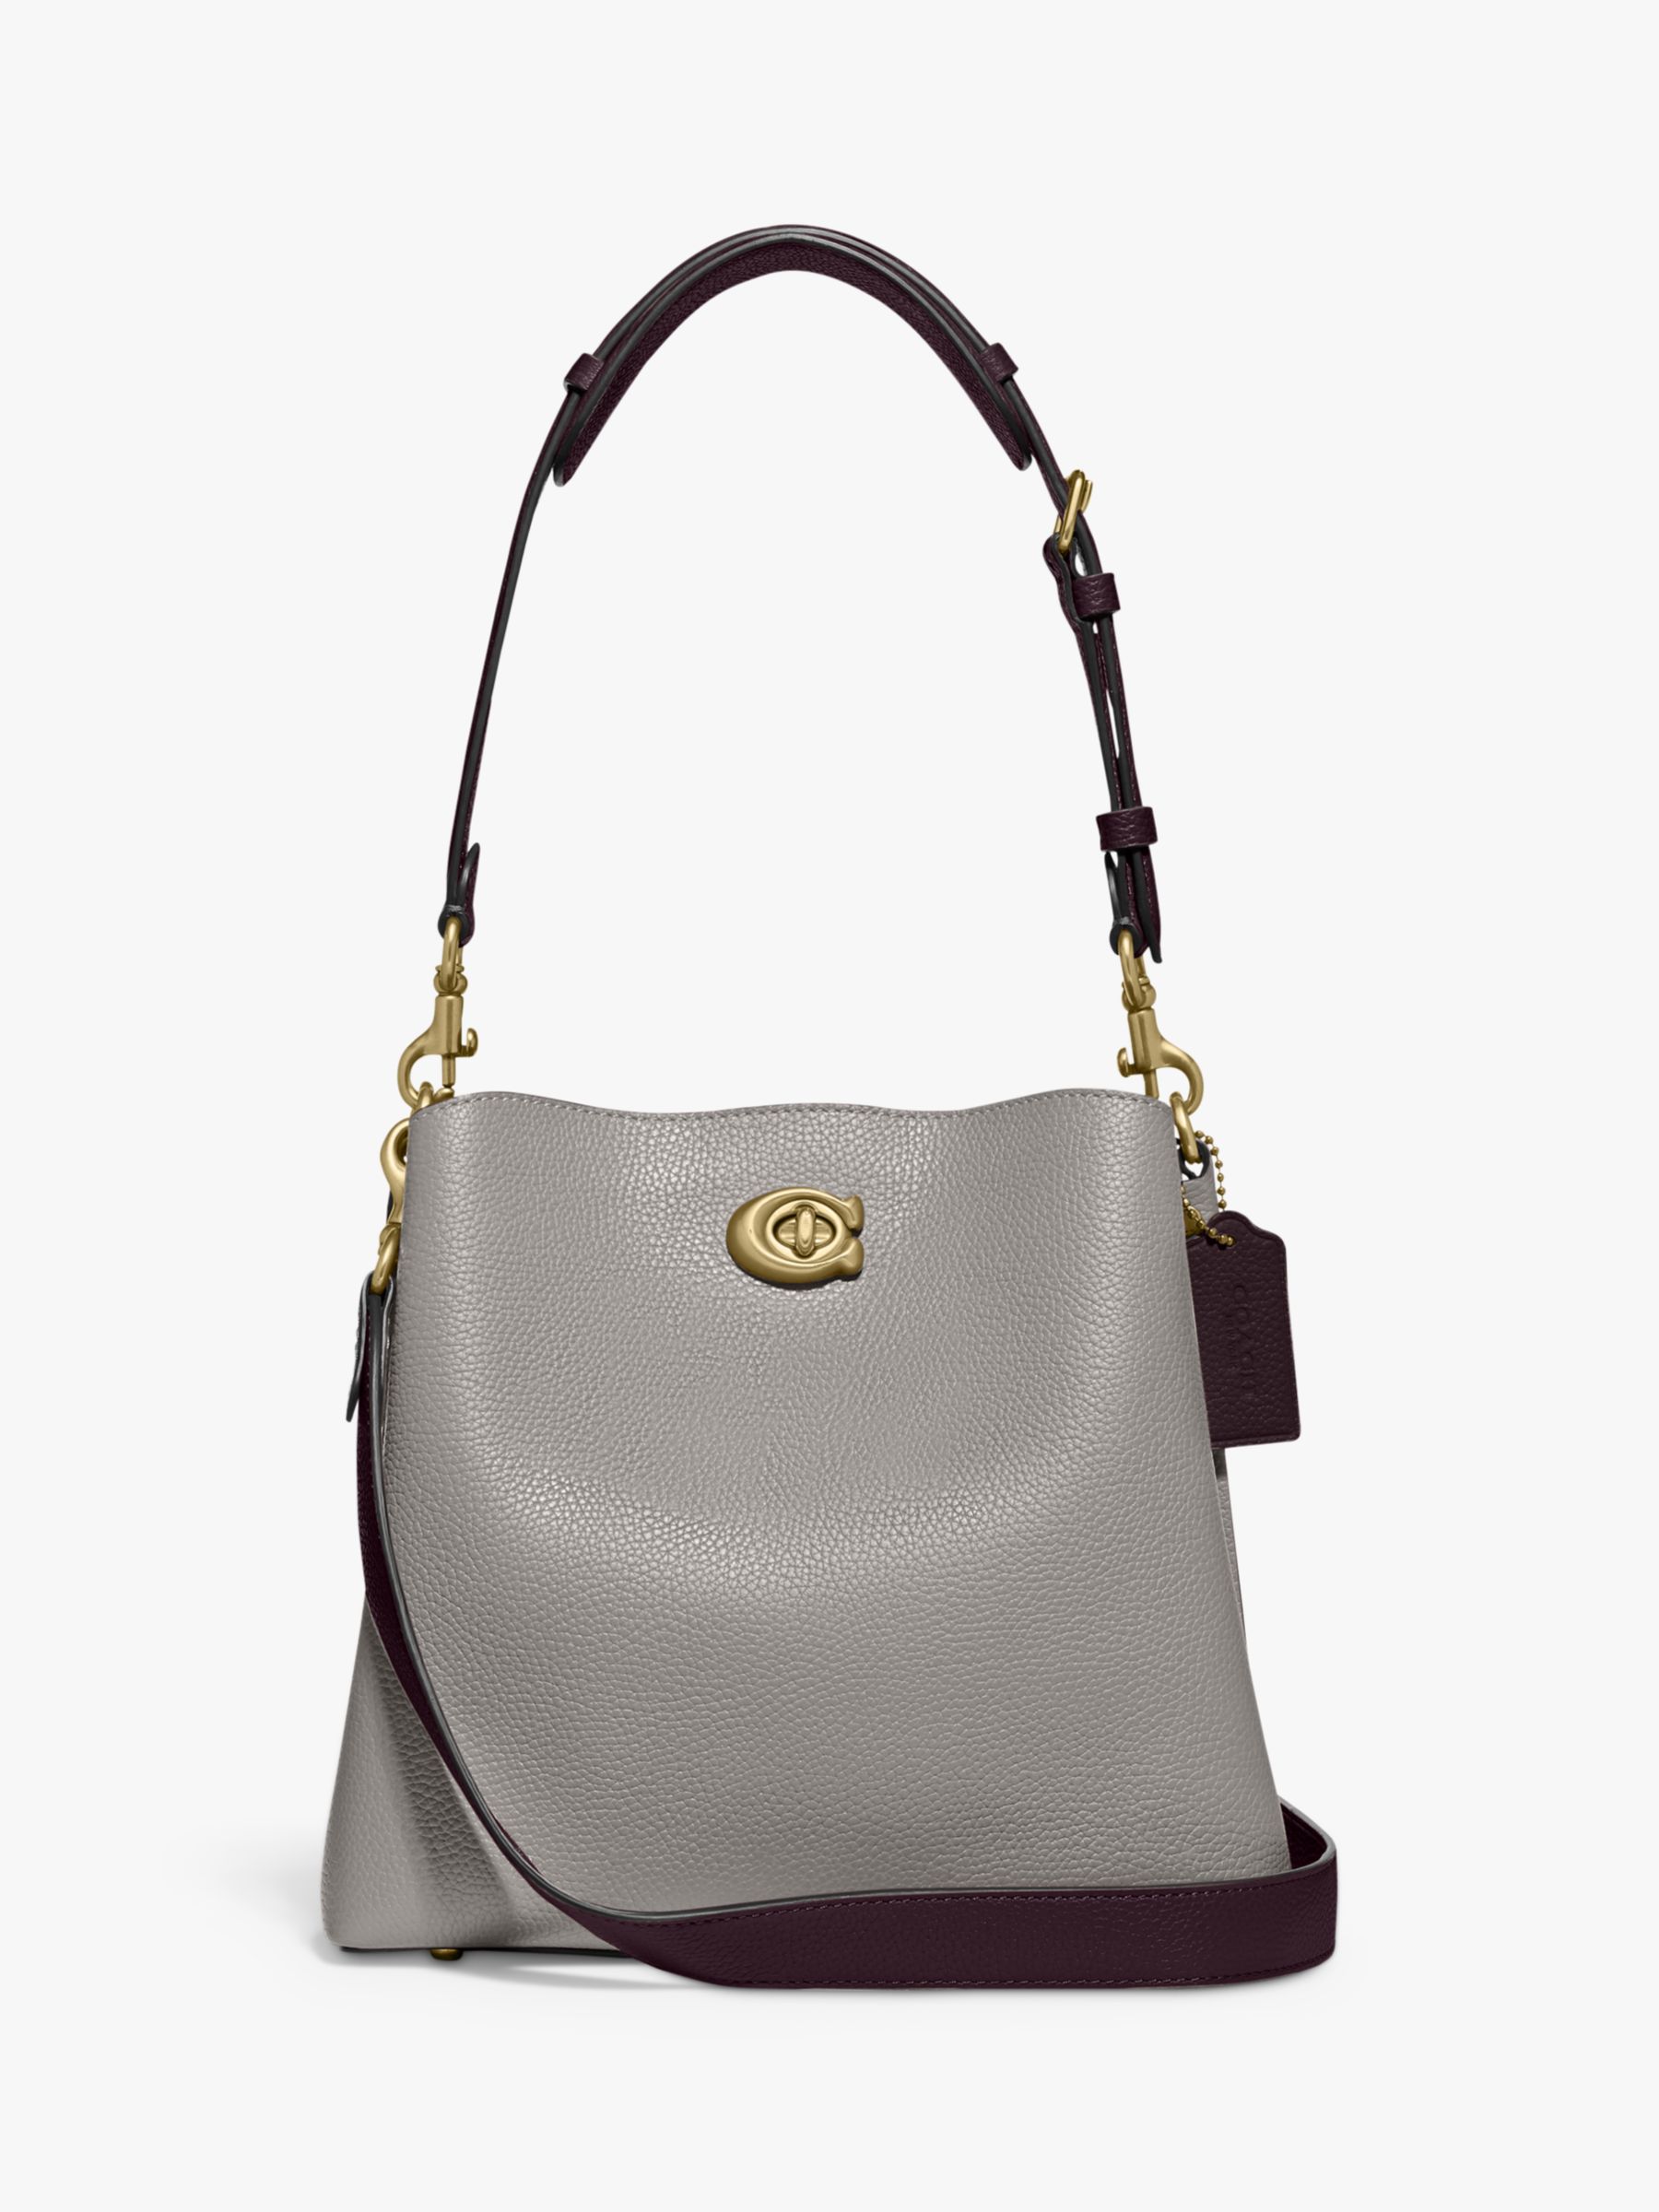 Coach Willow Leather Bucket Bag, Dove Grey at John Lewis & Partners